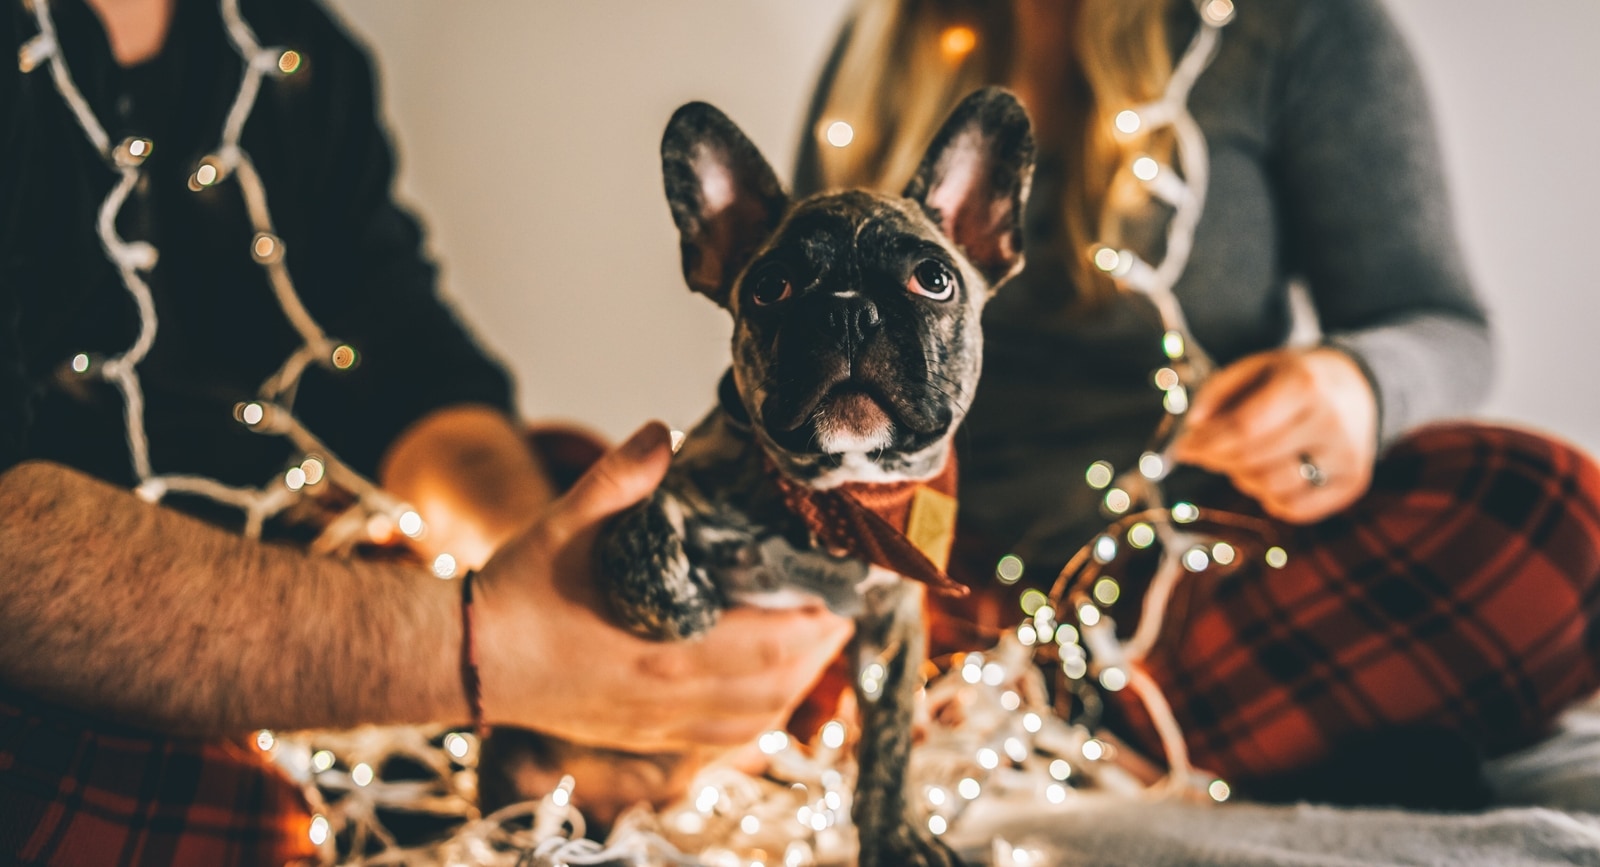 Tips to enjoy this winter season and holiday festivities with your pets